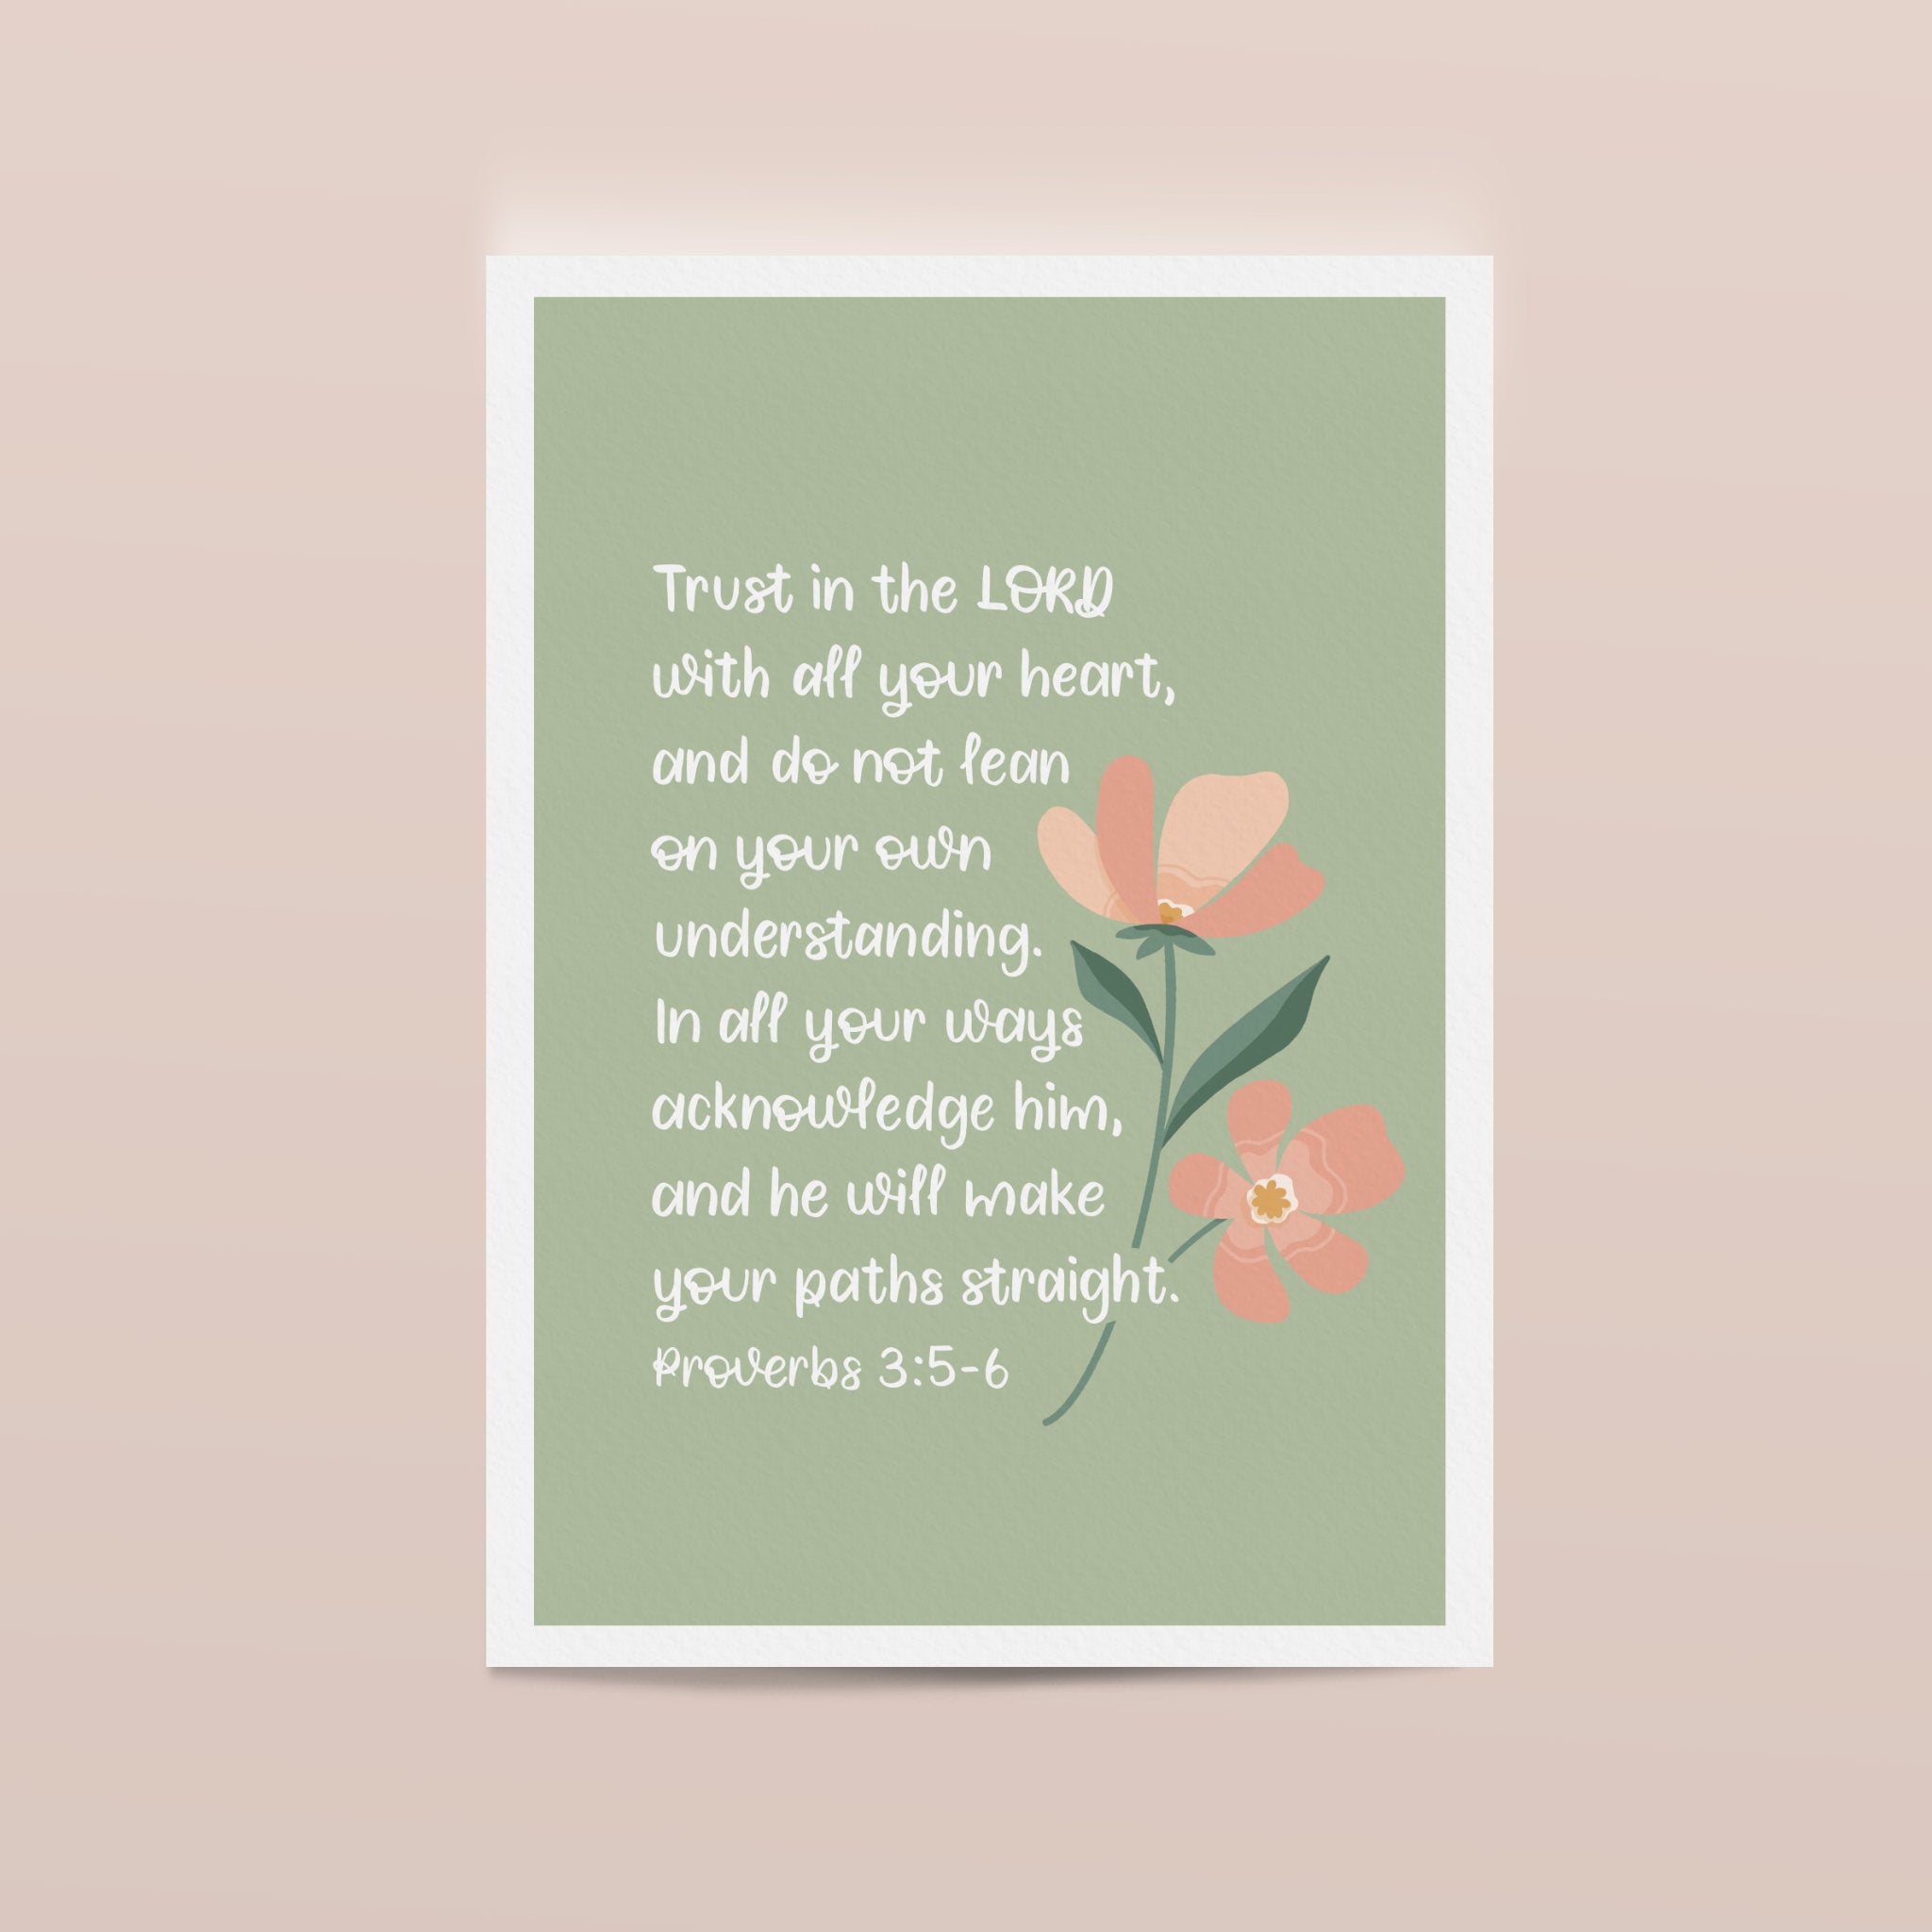 Unframed Bible Verse Print - Trust In The Lord With All Your Heart - Proverbs 3 - Decorative Floral Illustration